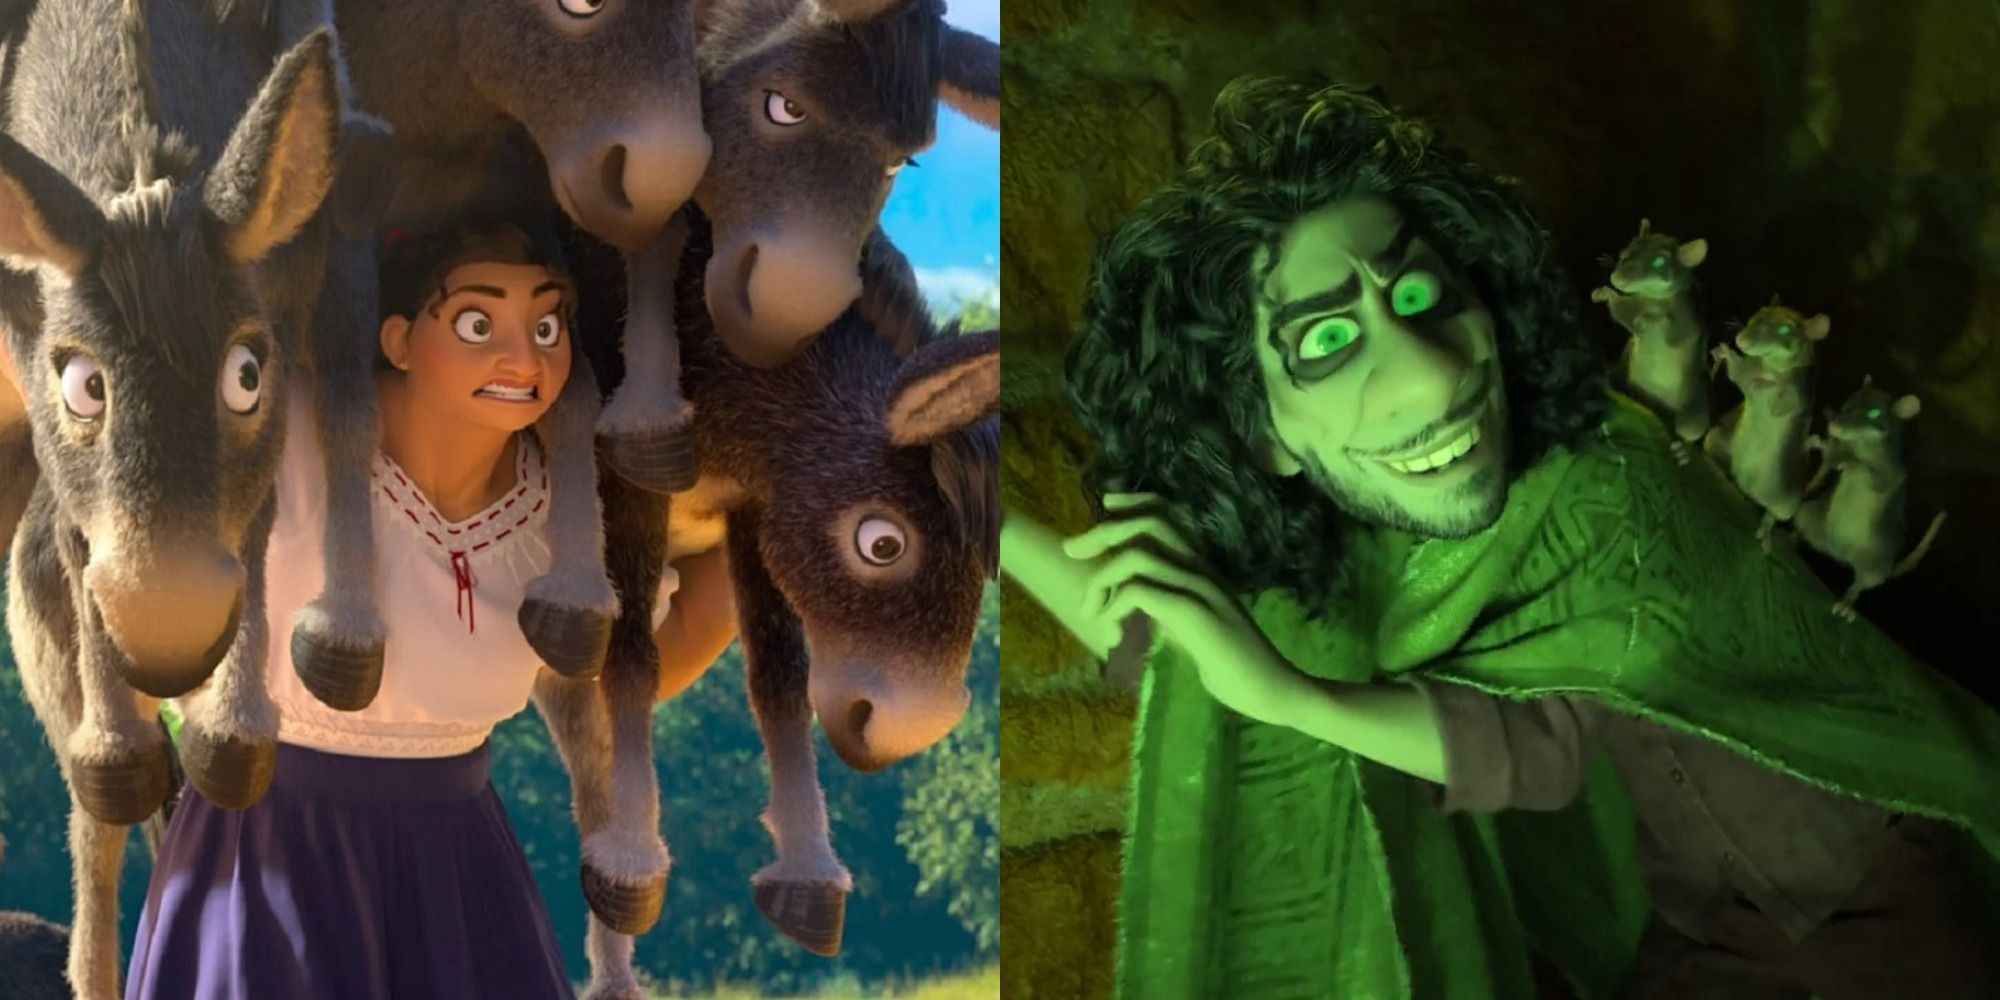 Split image of Luisa and Camilo using their powers in Encanto